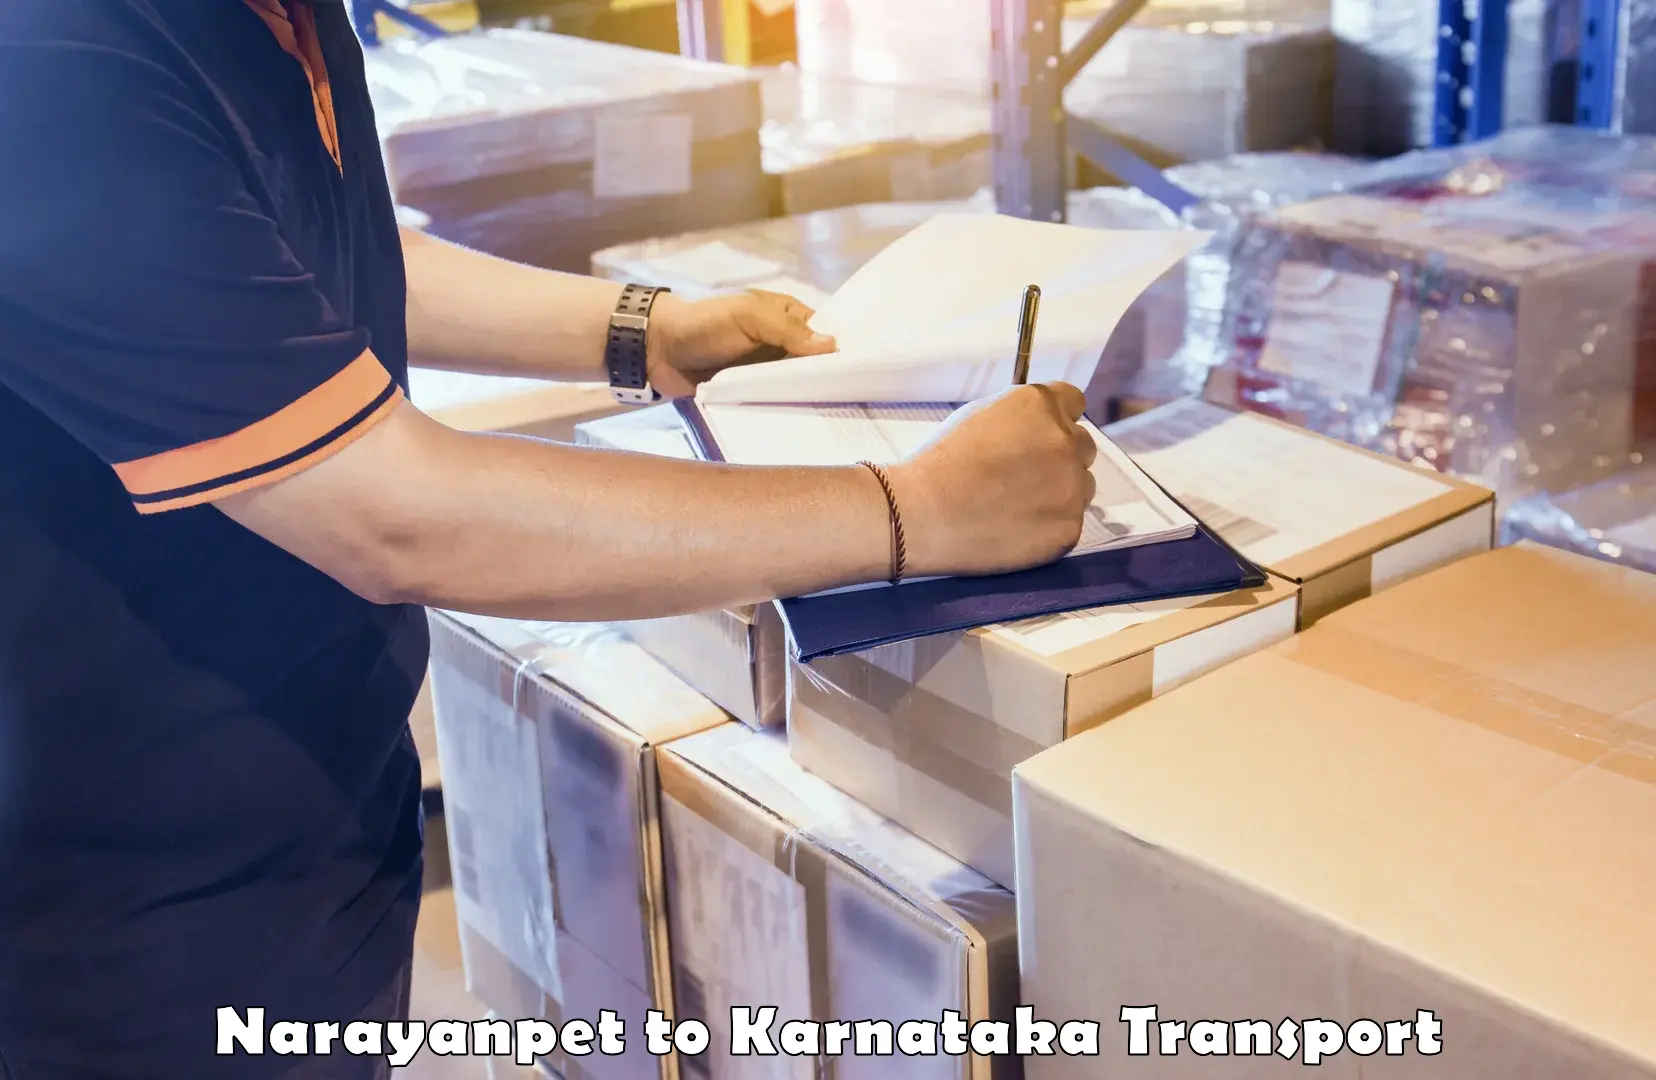 Air freight transport services in Narayanpet to Tumkur